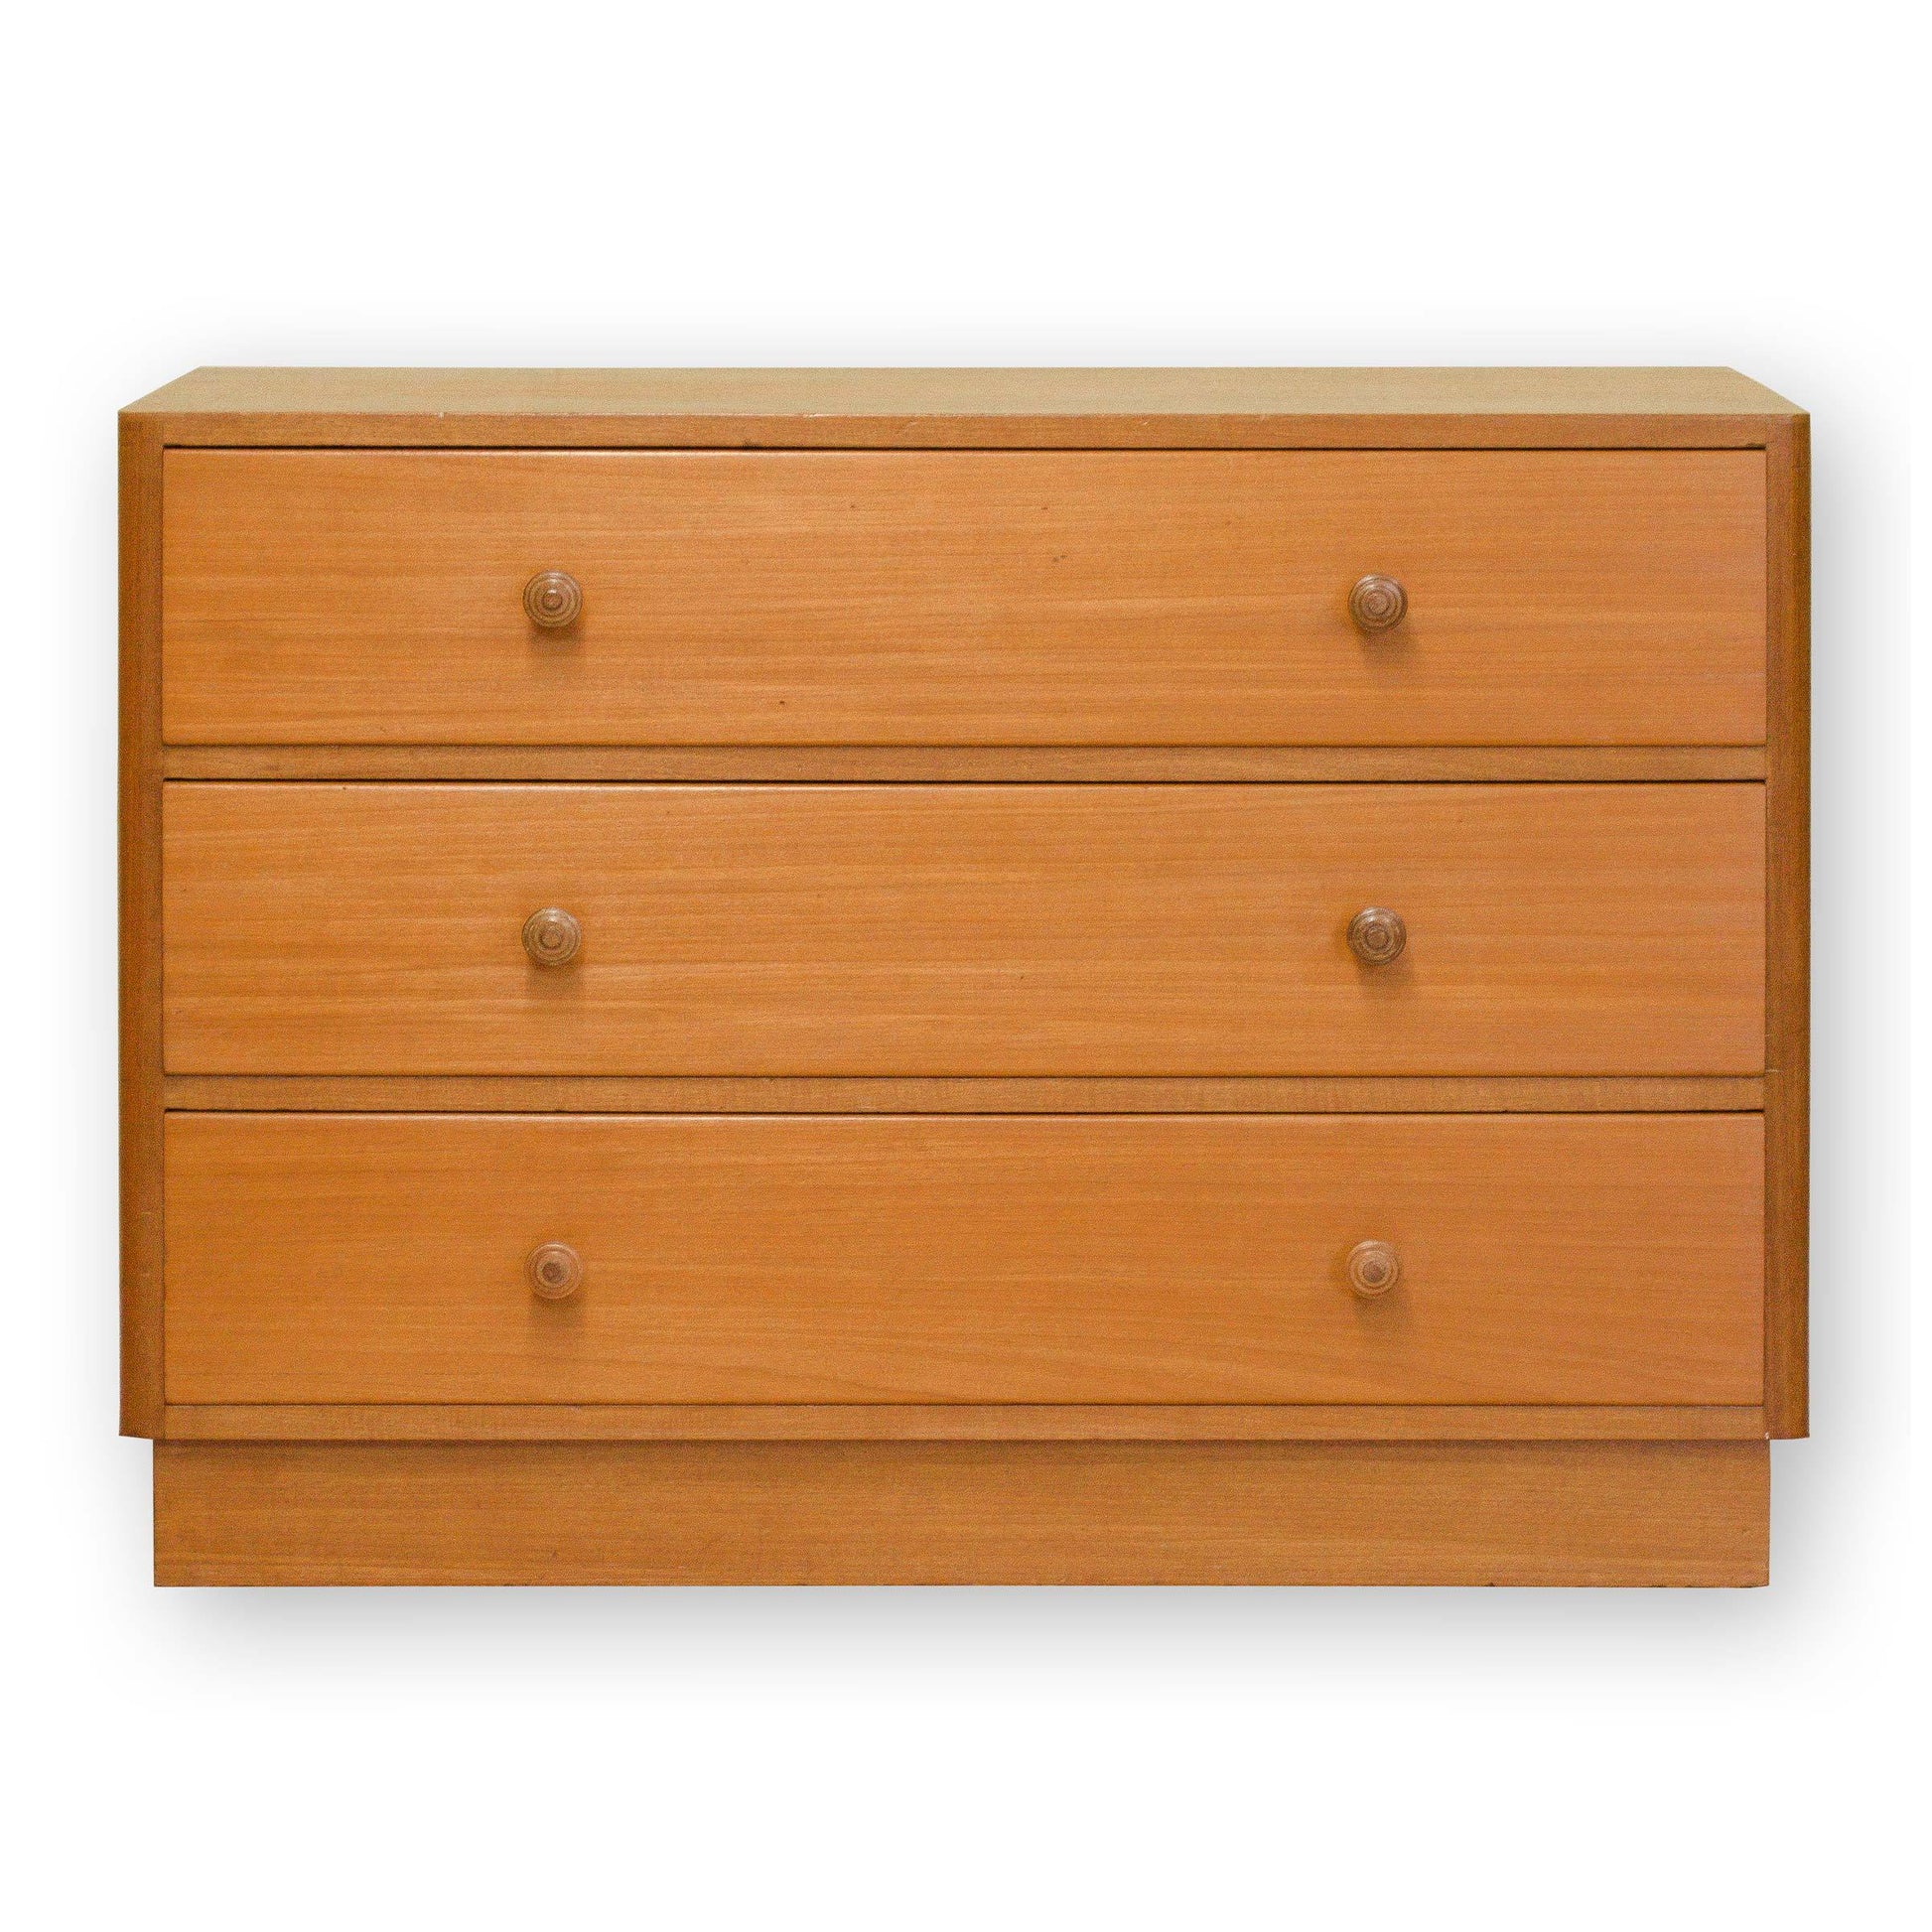 Gordon Russell Cotswold School Arts Crafts Walnut Chest of Drawers